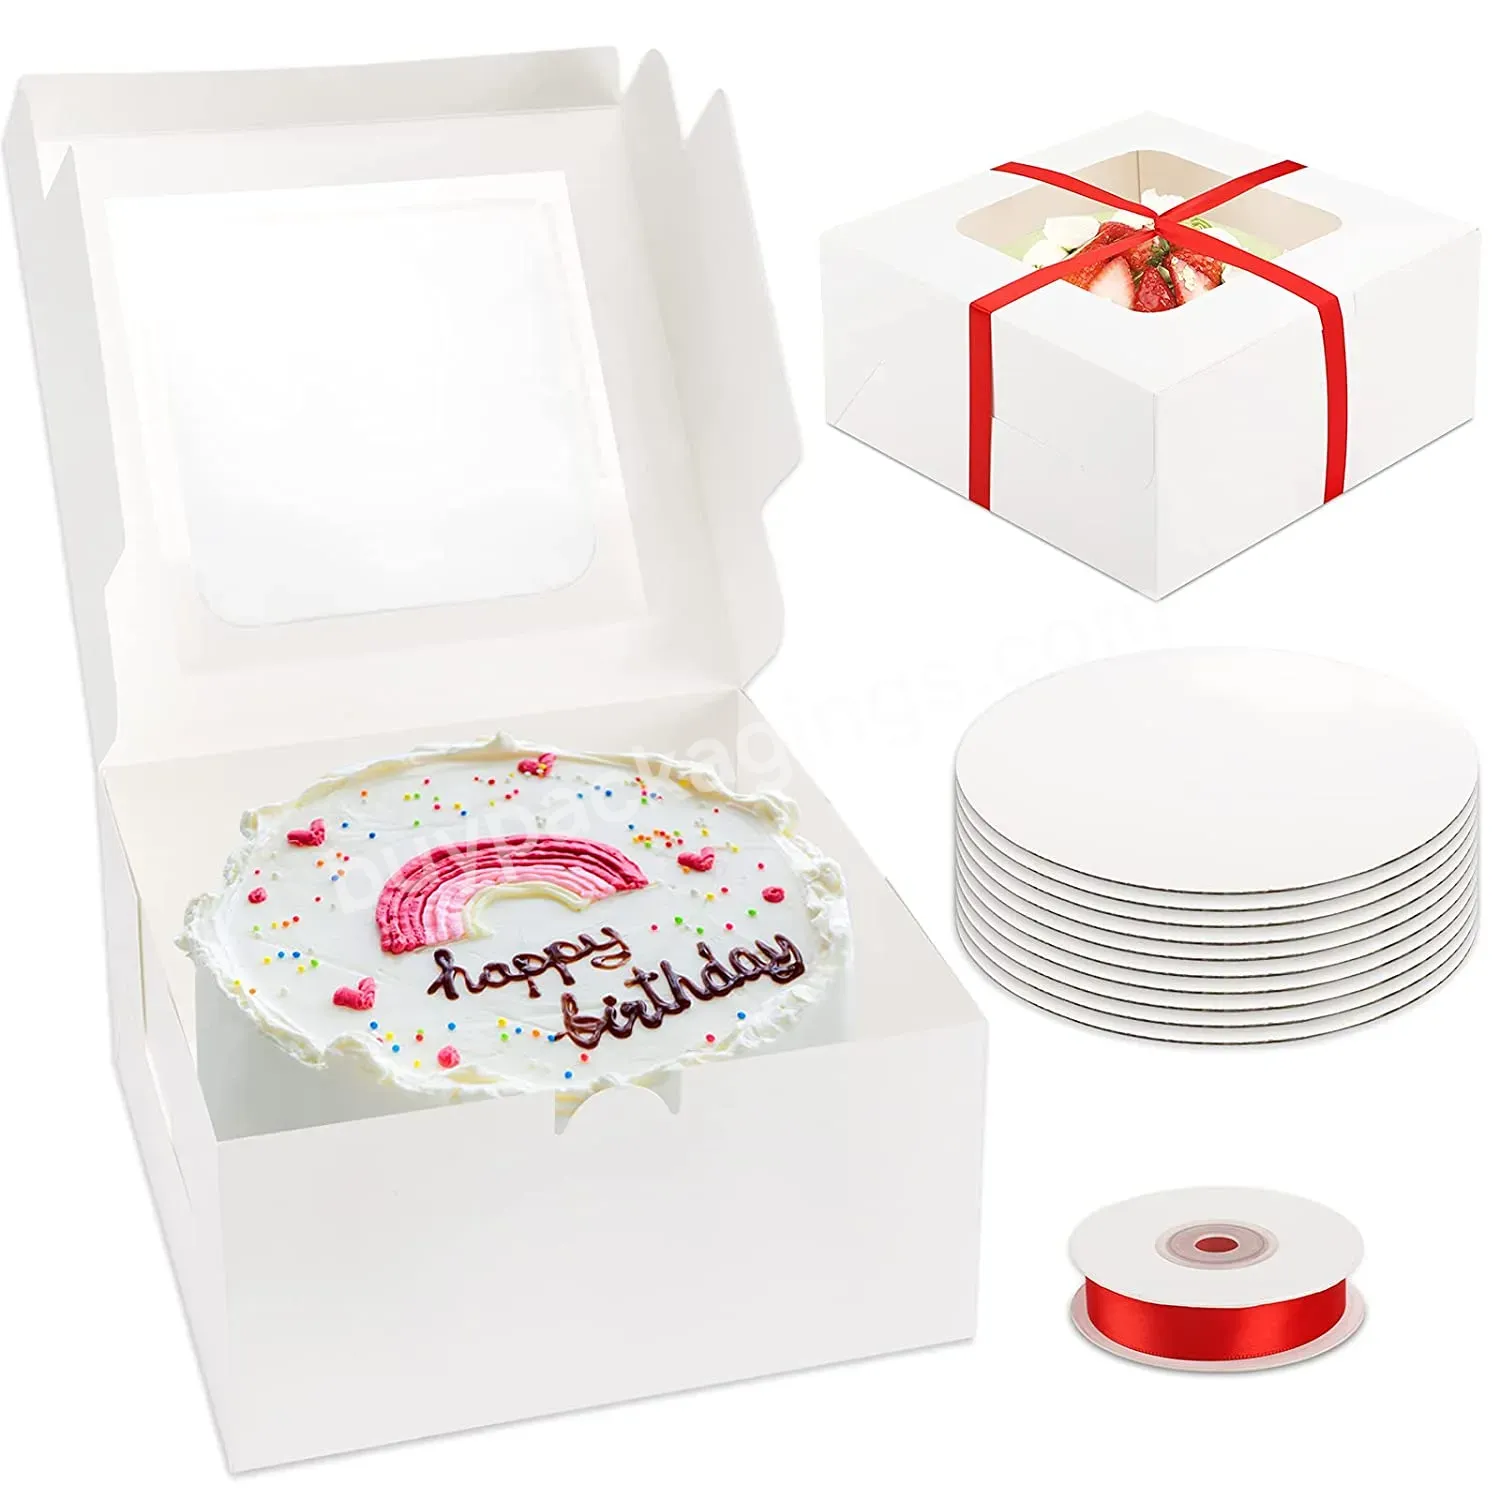 Wholesale White Square Cake Box Recyclable Paper Packaging Wedding Birthday Party Exquisite Cake Box